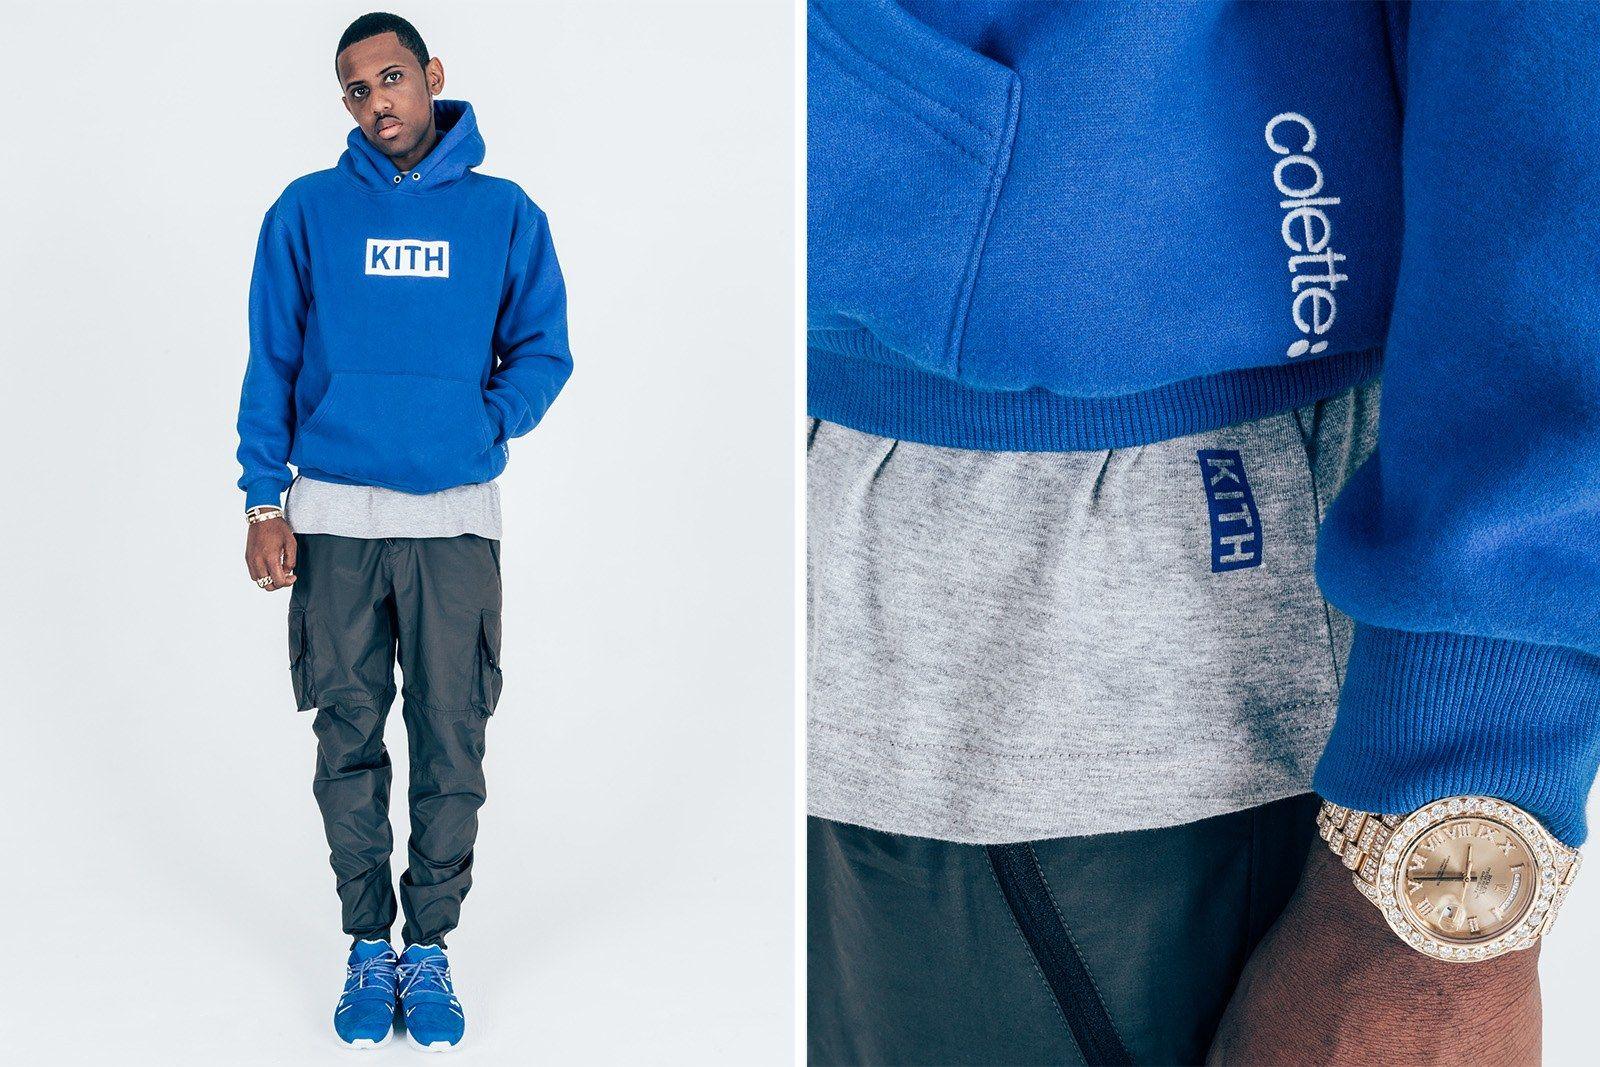 Kith Blue Logo - Kith Kicks Off 5th Anniversary with Colette Collaboration, Launching ...